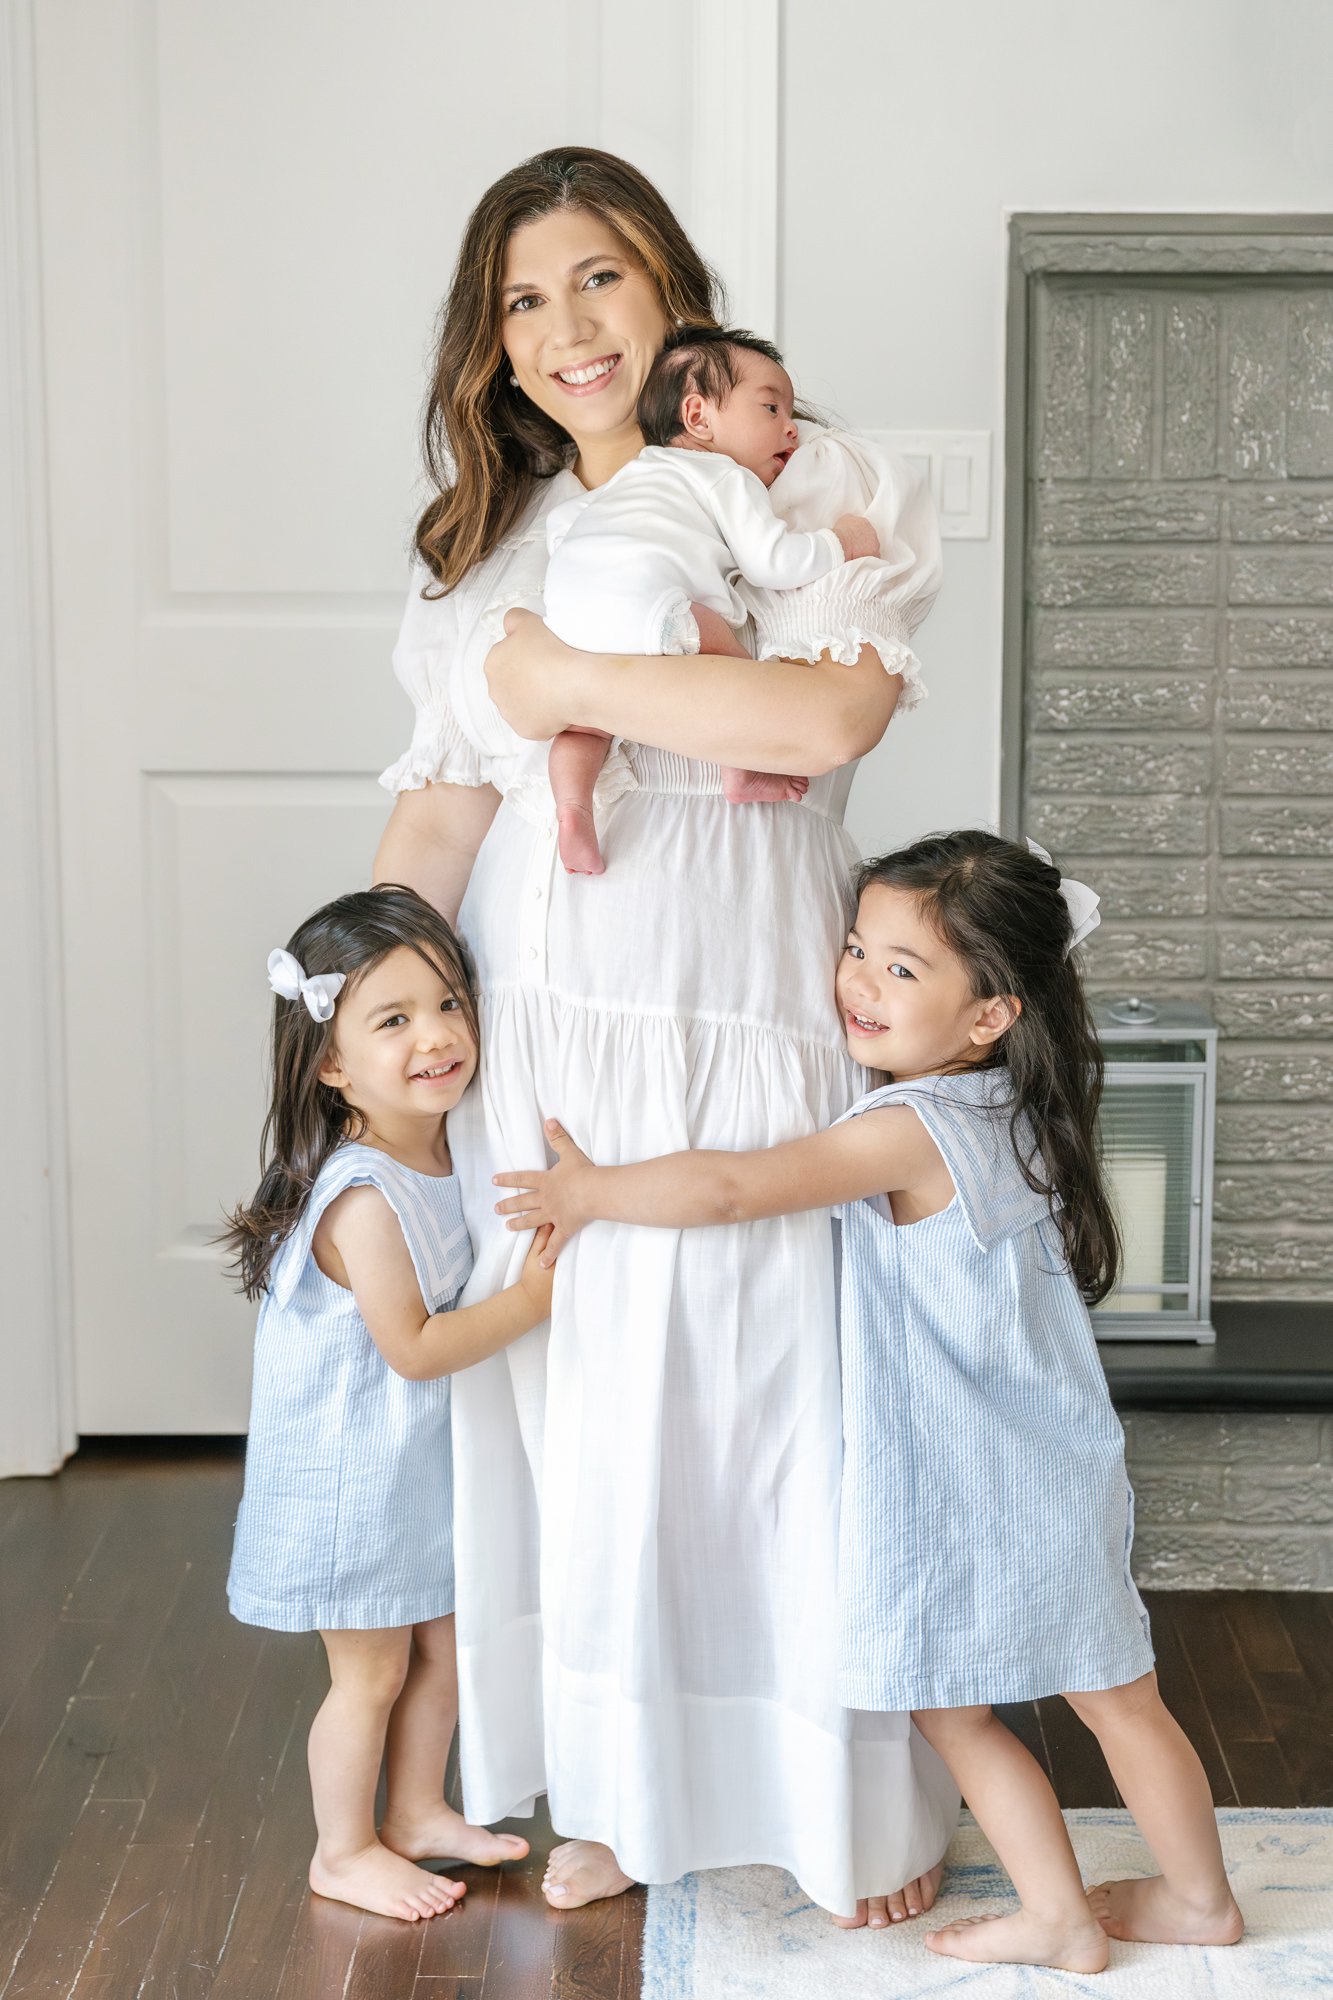  Beautiful mom stands holding her newborn daughter in a white onesie while her two young daughters give her big hugs around her legs. #newyorkcityphotographer #familyportraits #newbornportraitsession #inhomephotography #familyoffive #familyposeinspo 